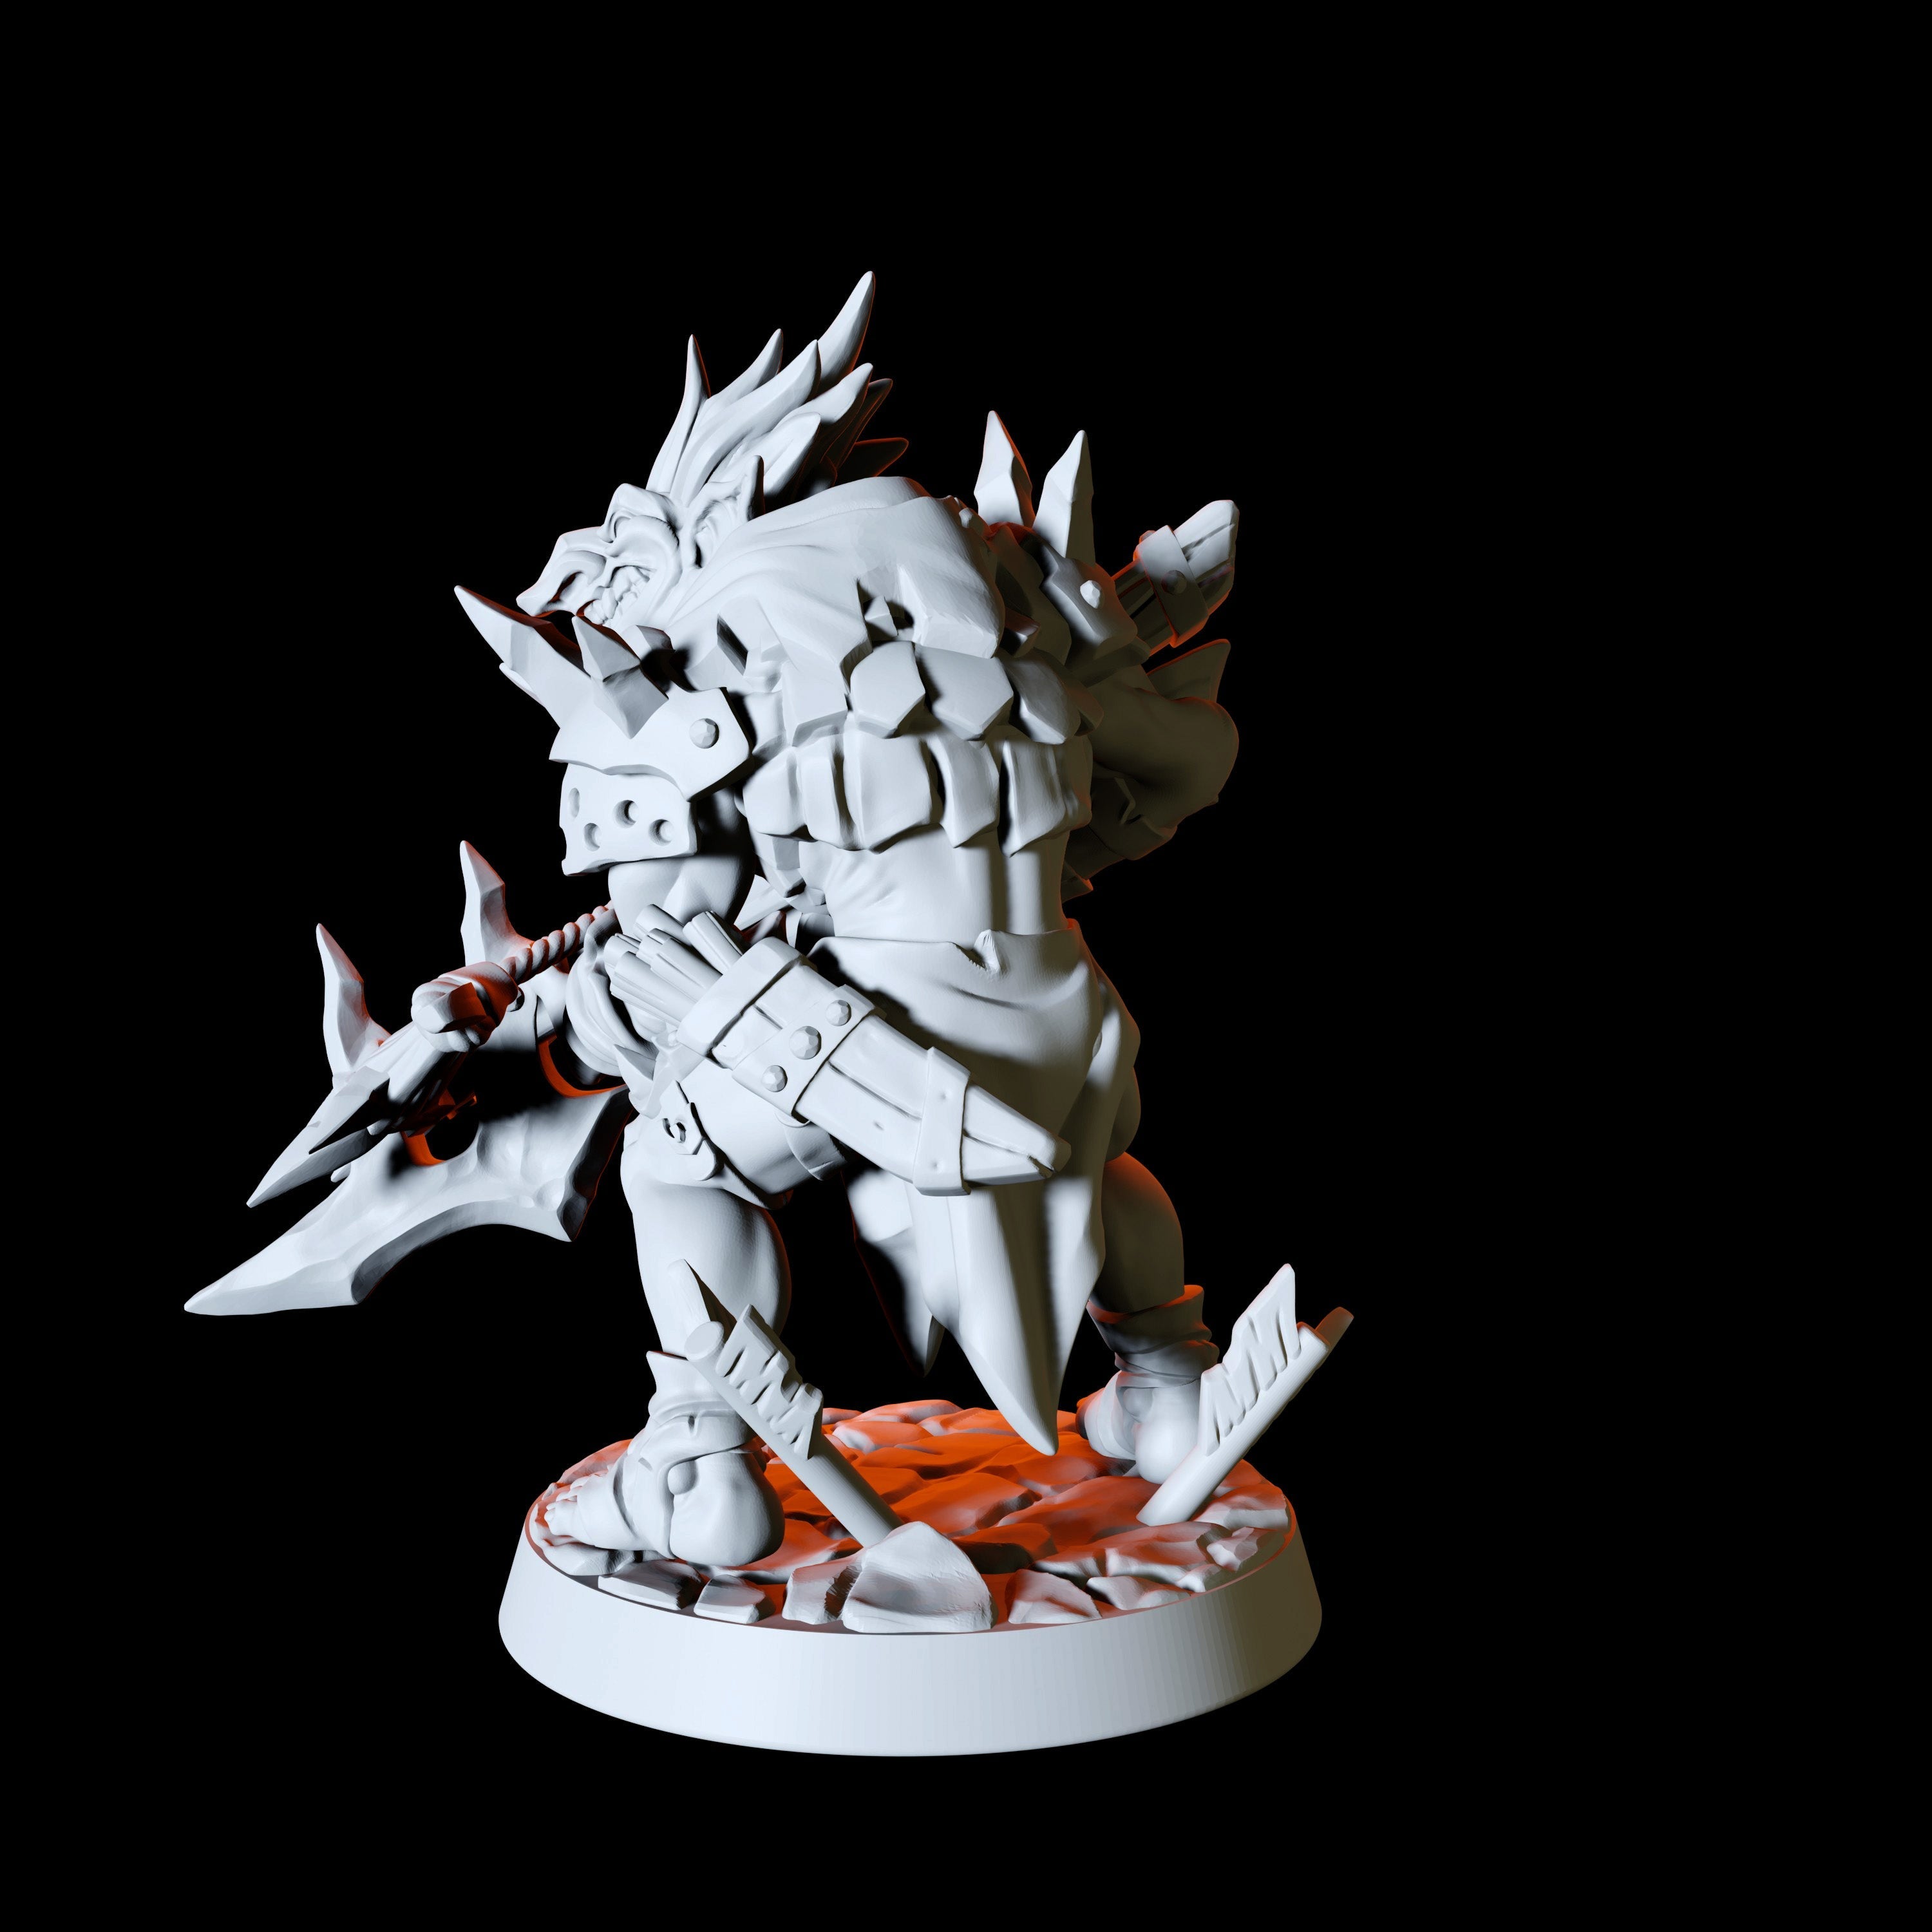 Crossbow Hobgoblin Miniature for Dungeons and Dragons - Myth Forged